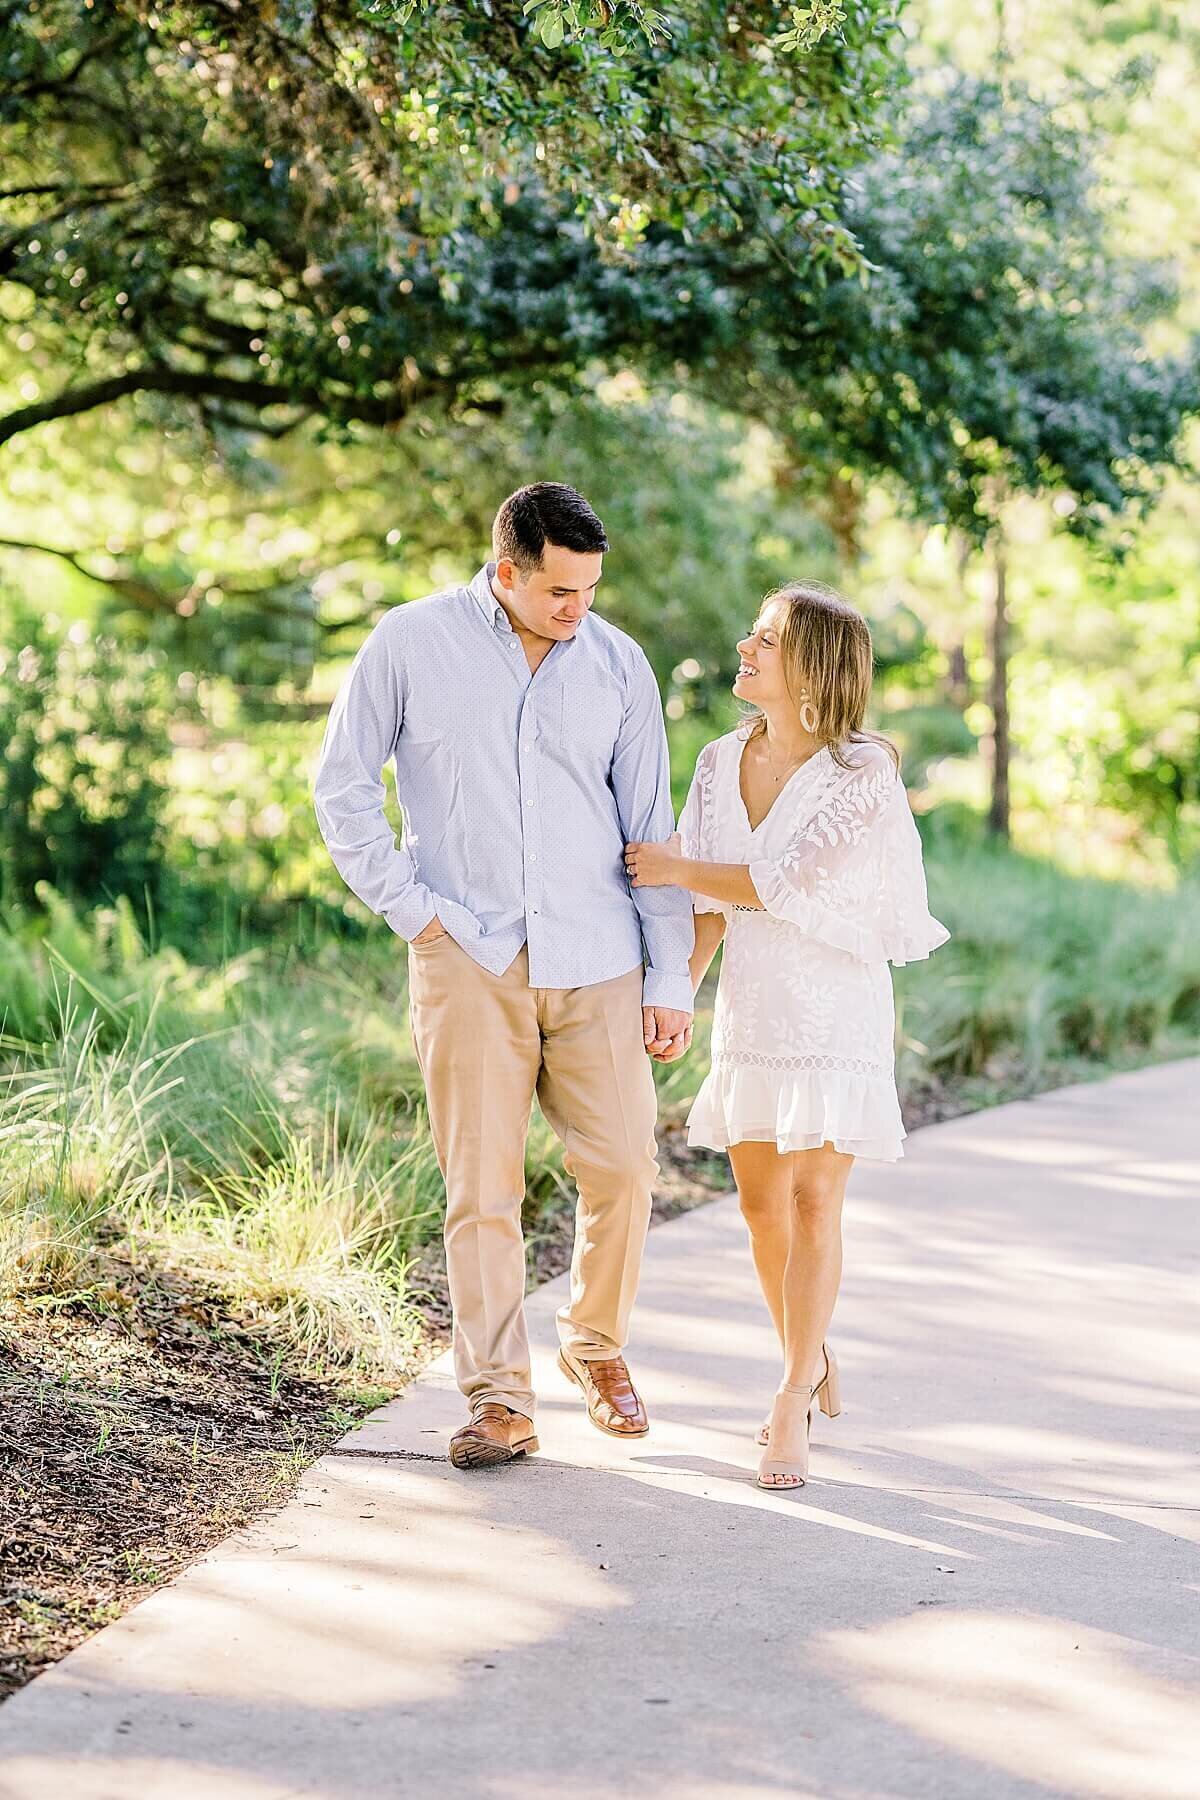 McGovern-Centennial-Gardens-Hermann-Park-Engagement-Session-Alicia-Yarrish-Photography_0030